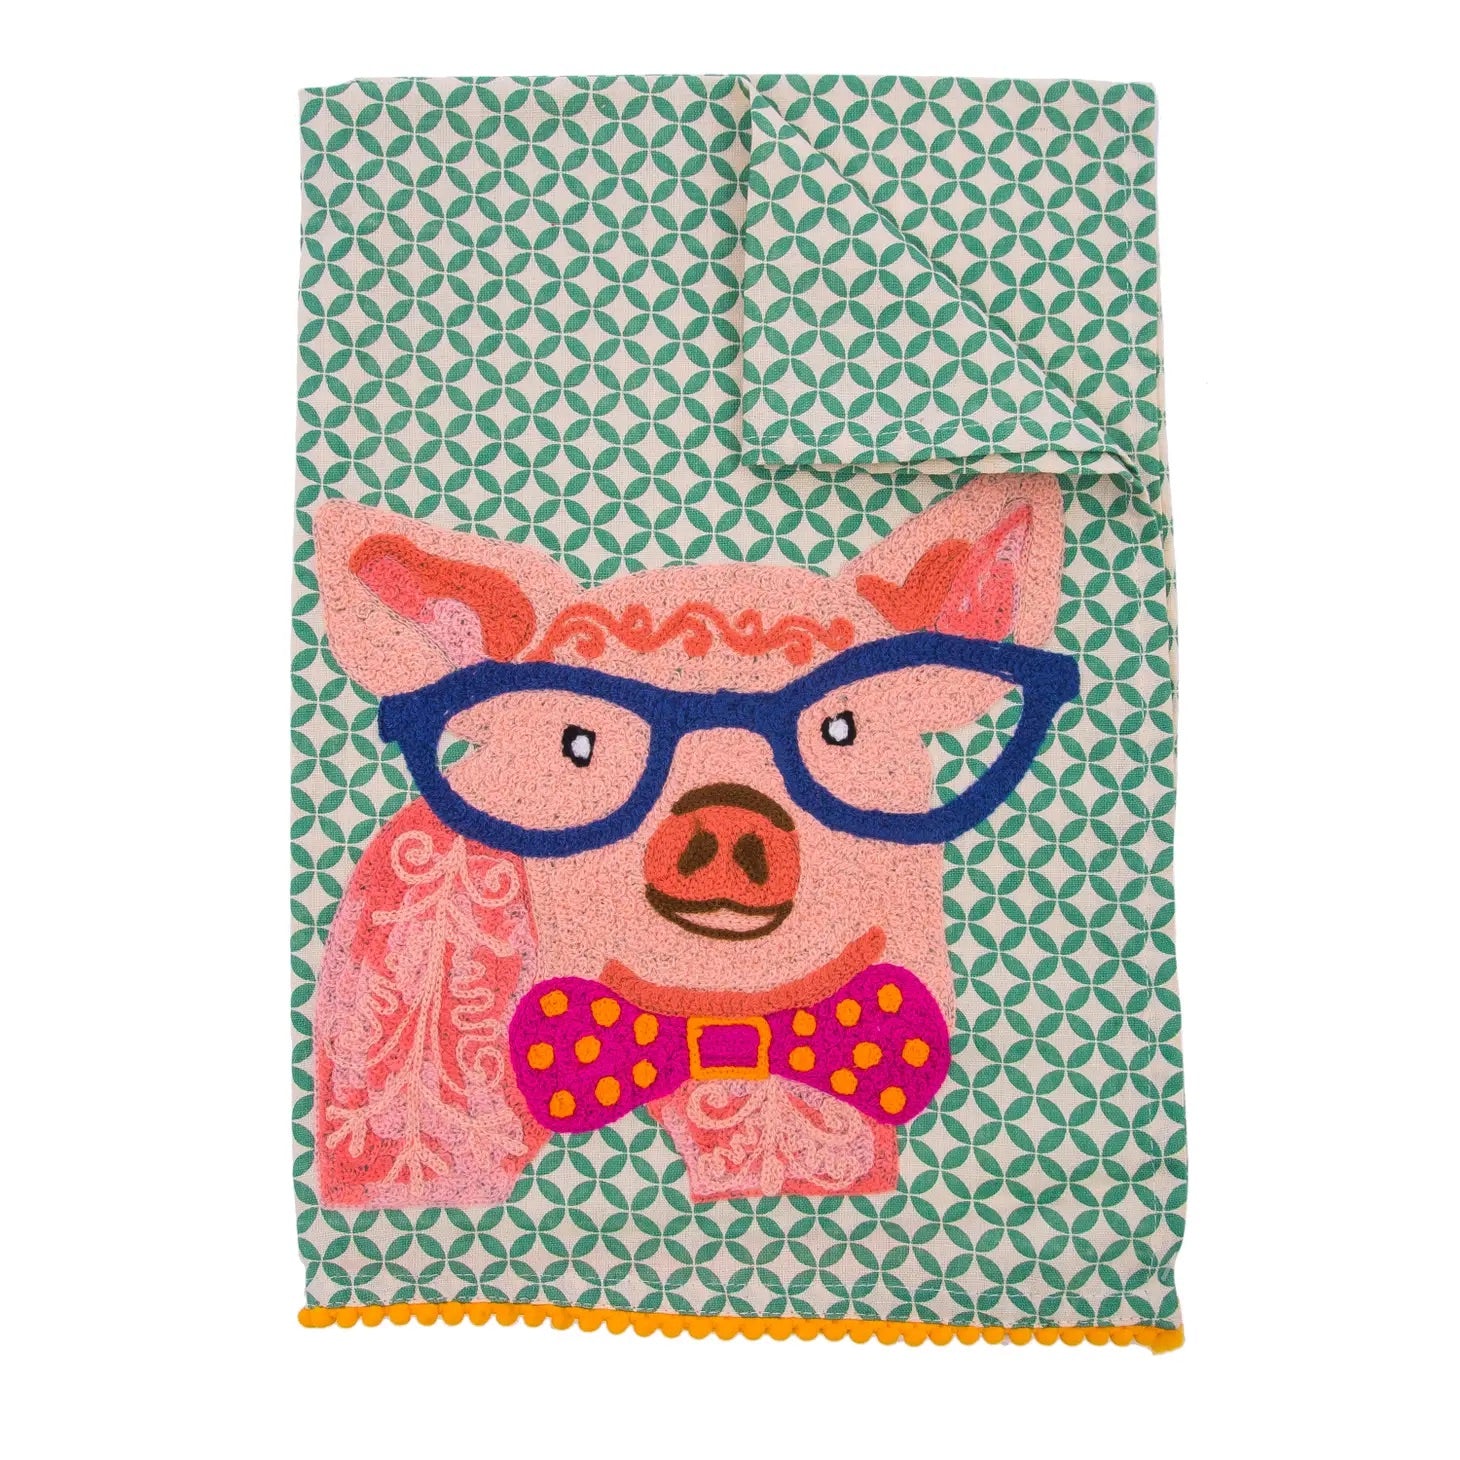 Embroidered towel with a little pig with blue glasses and pink tie in the center. It is handmade with green and white texture and orange border. 